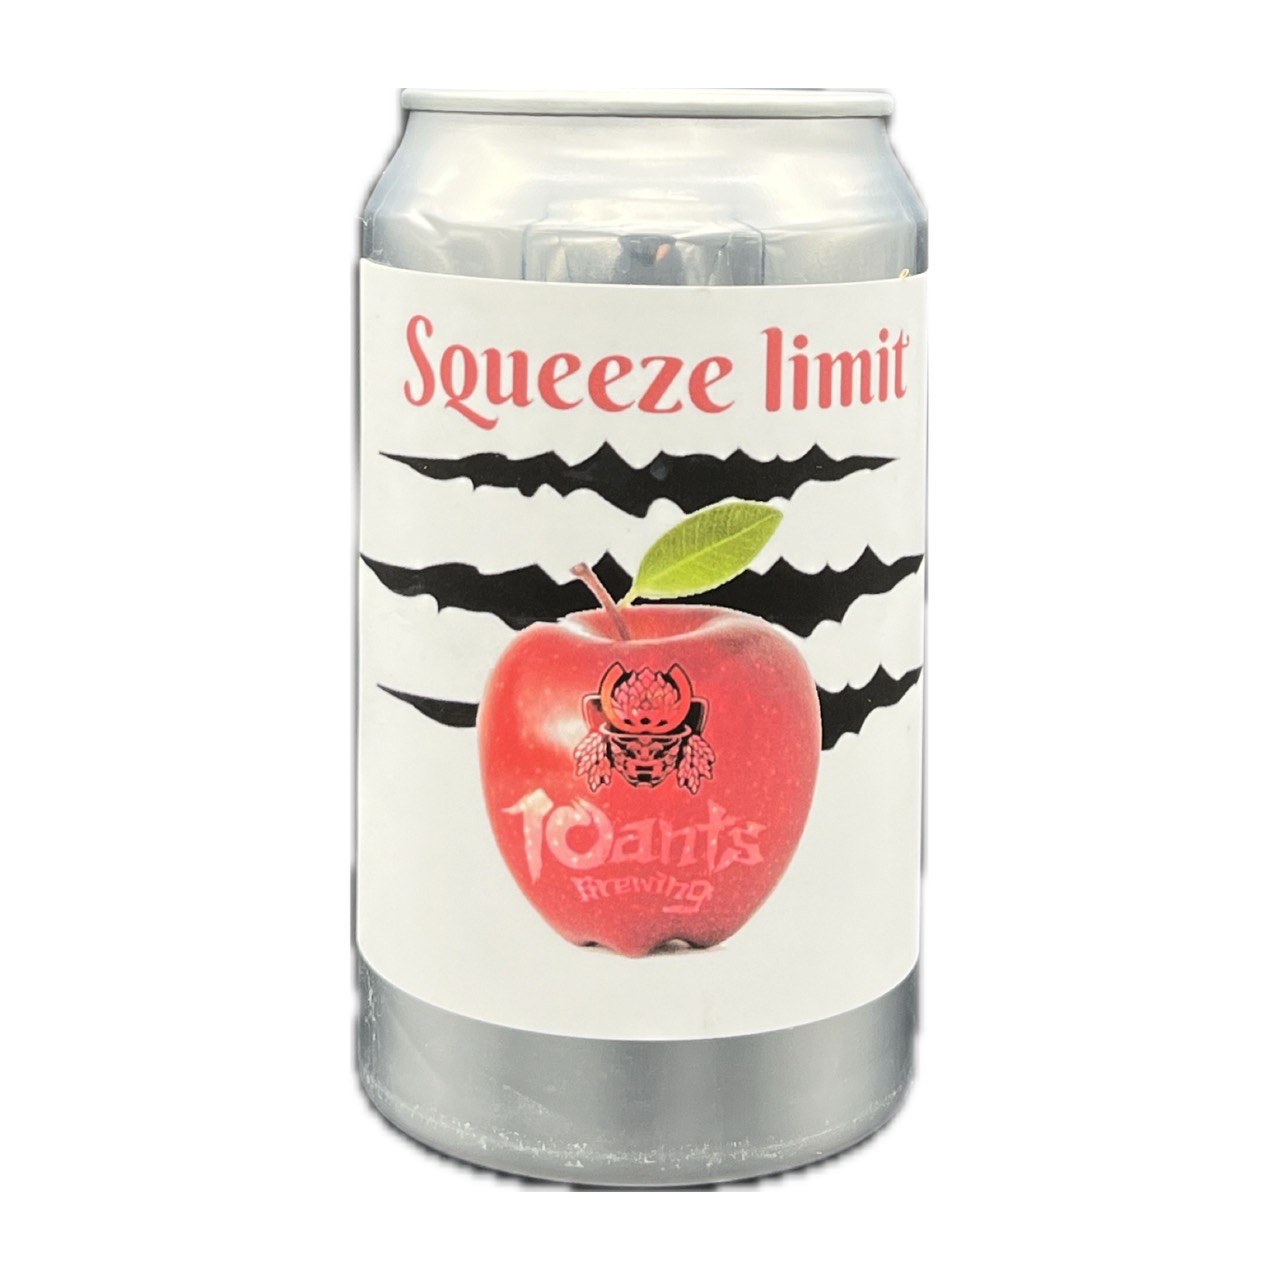 ☆Squeeze limit/10ants Brewing